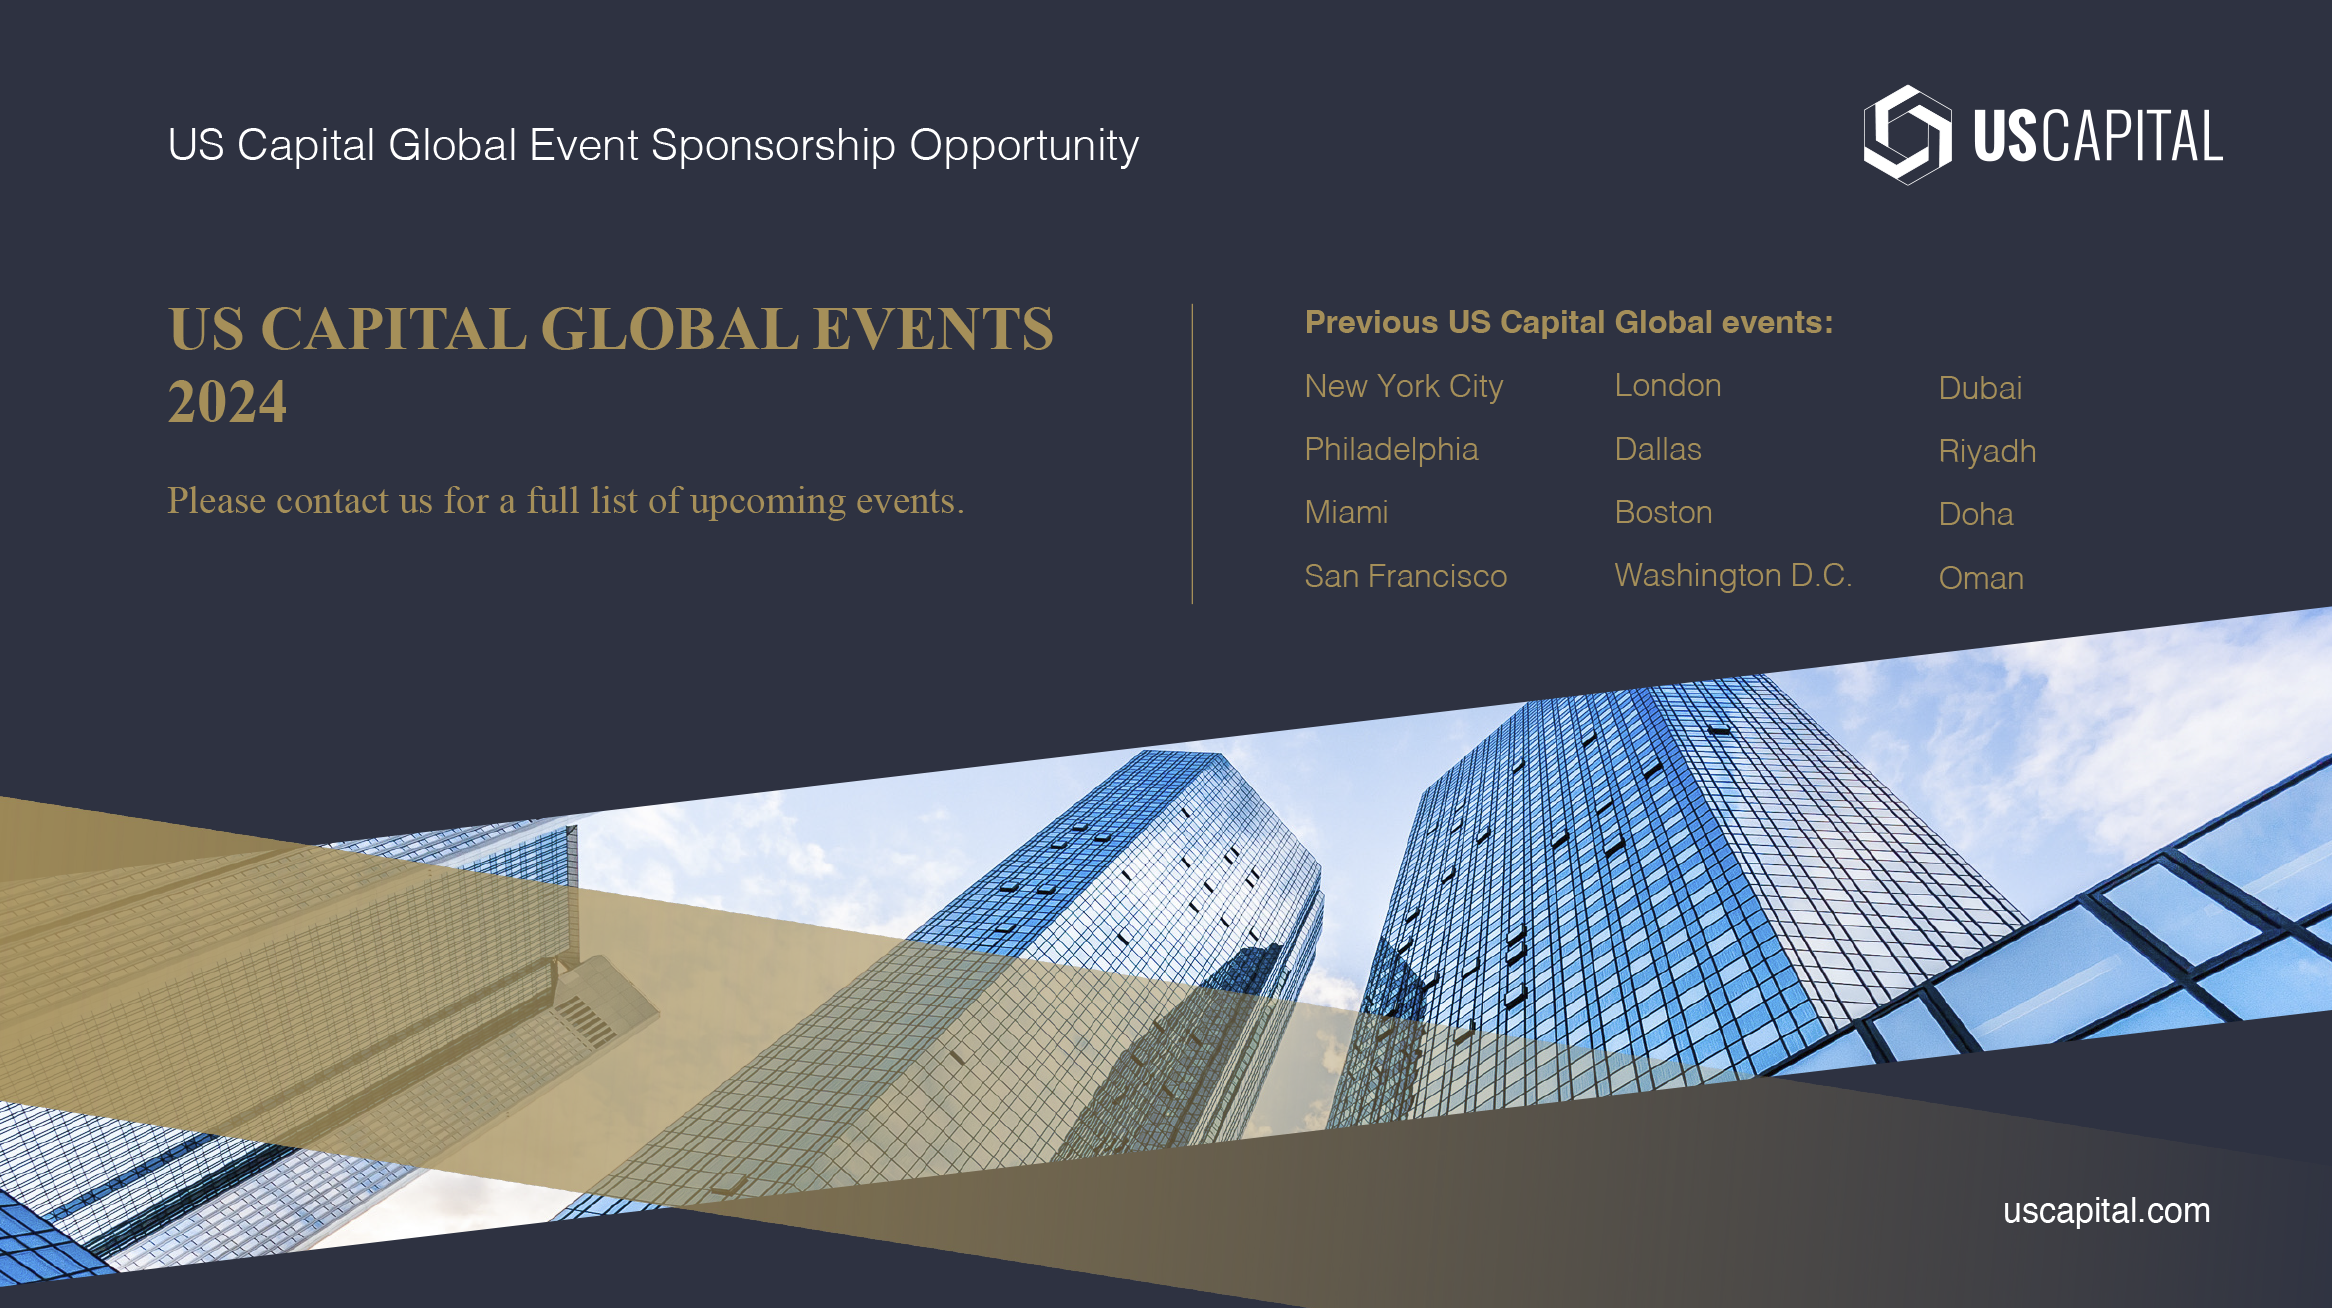 US Capital Global Event Sponsorship Opportunities